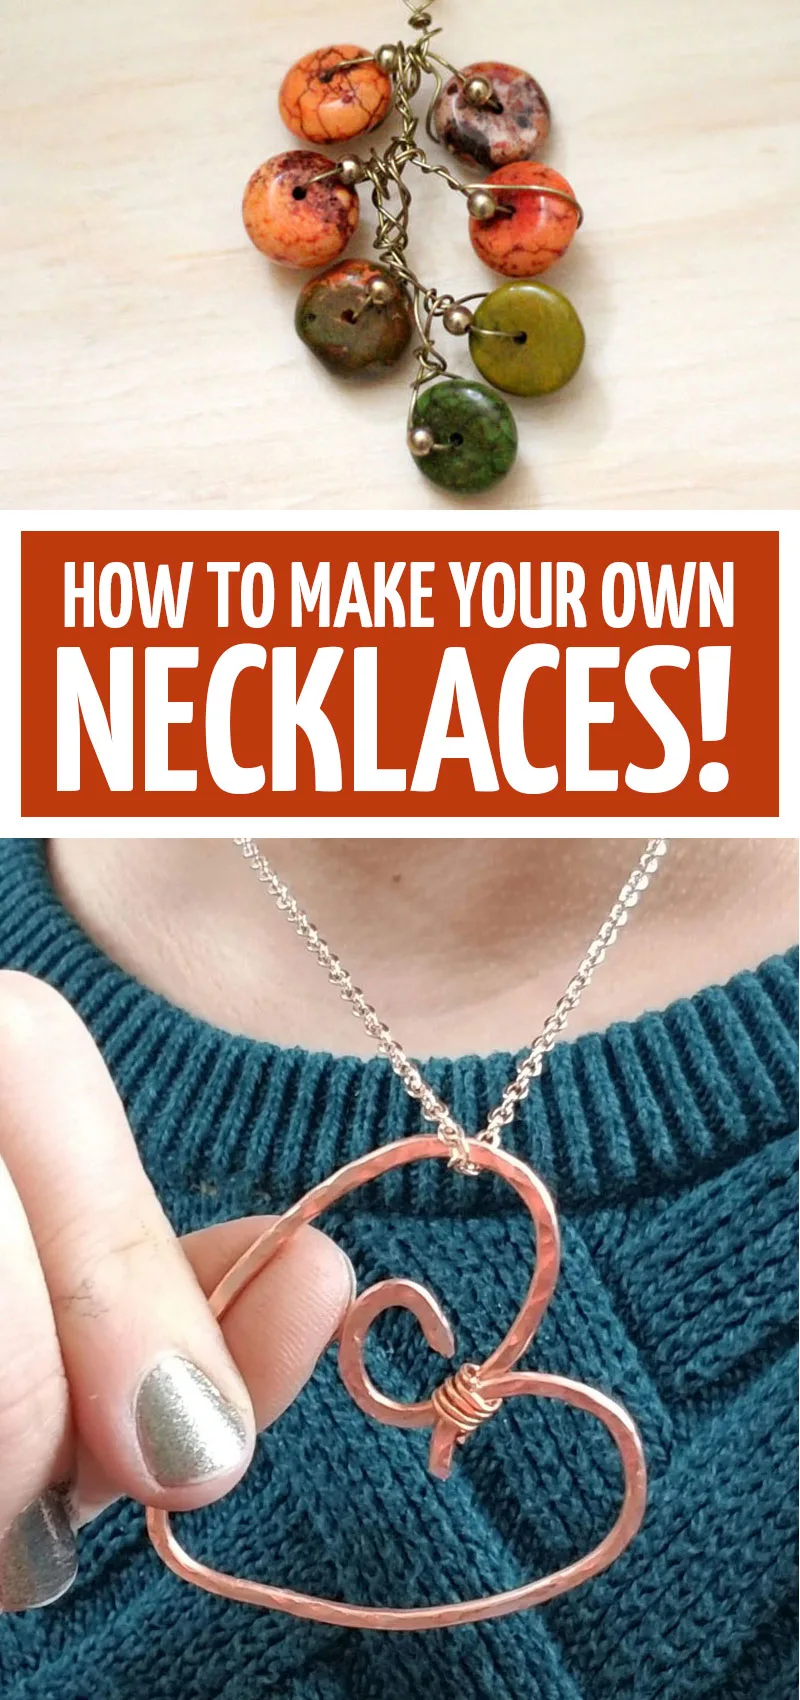 Click to learn how to make your own necklace with so many adorable necklace ideas and projects to make! These DIY necklaces and pendsants include wire wrapping ideas, recycled jewelry, and more!